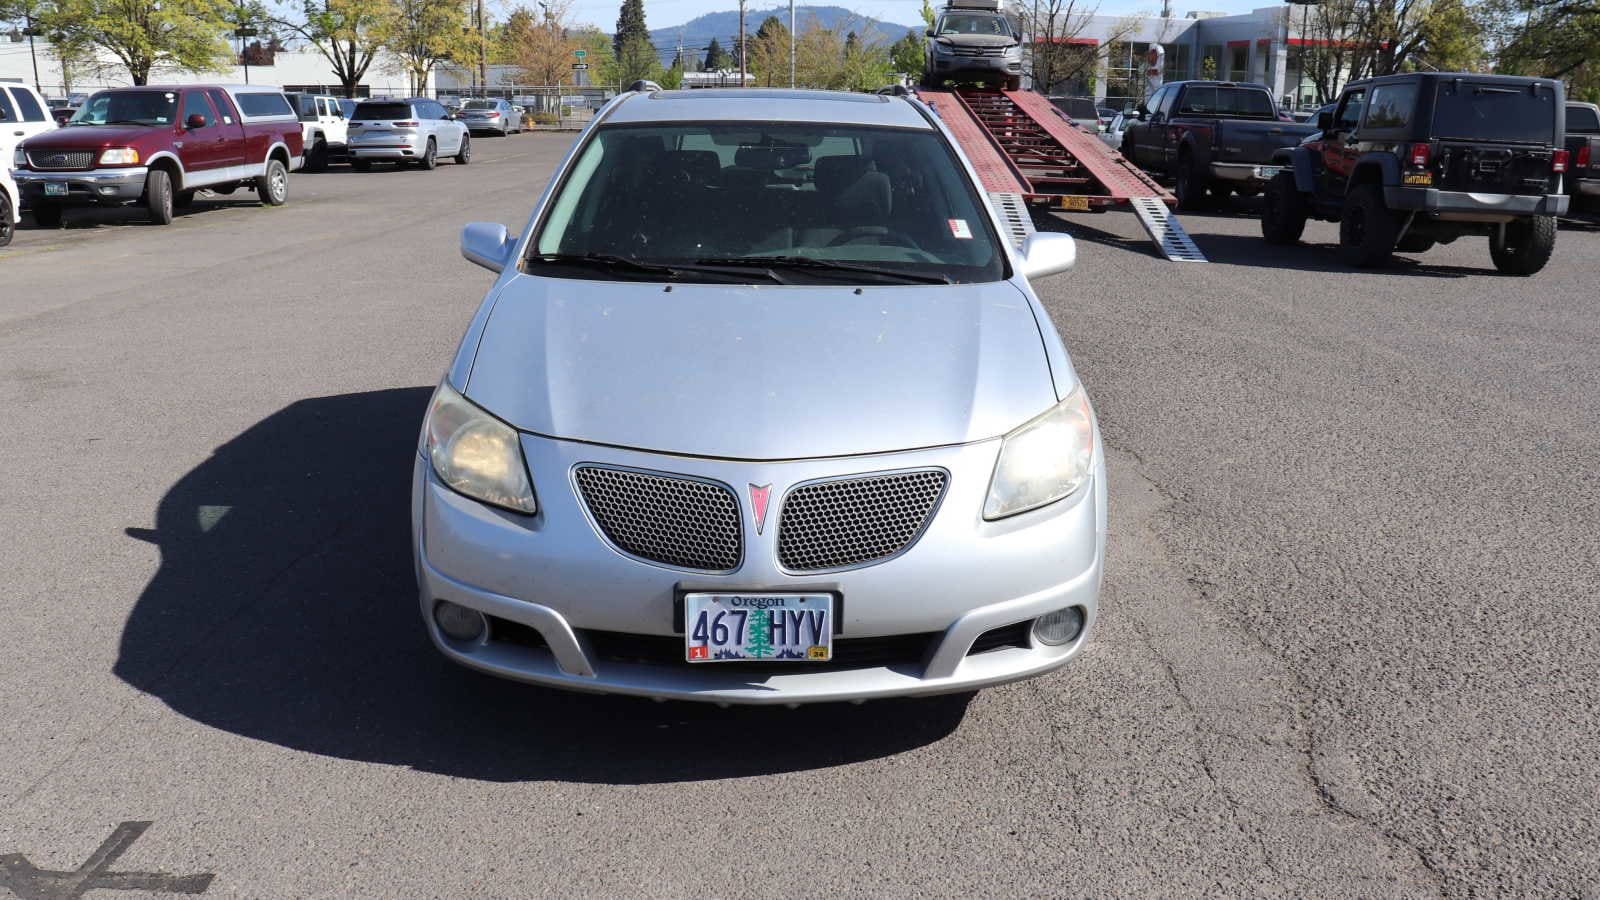 Used 2007 Pontiac Vibe  with VIN 5Y2SL678X7Z405092 for sale in Springfield, OR